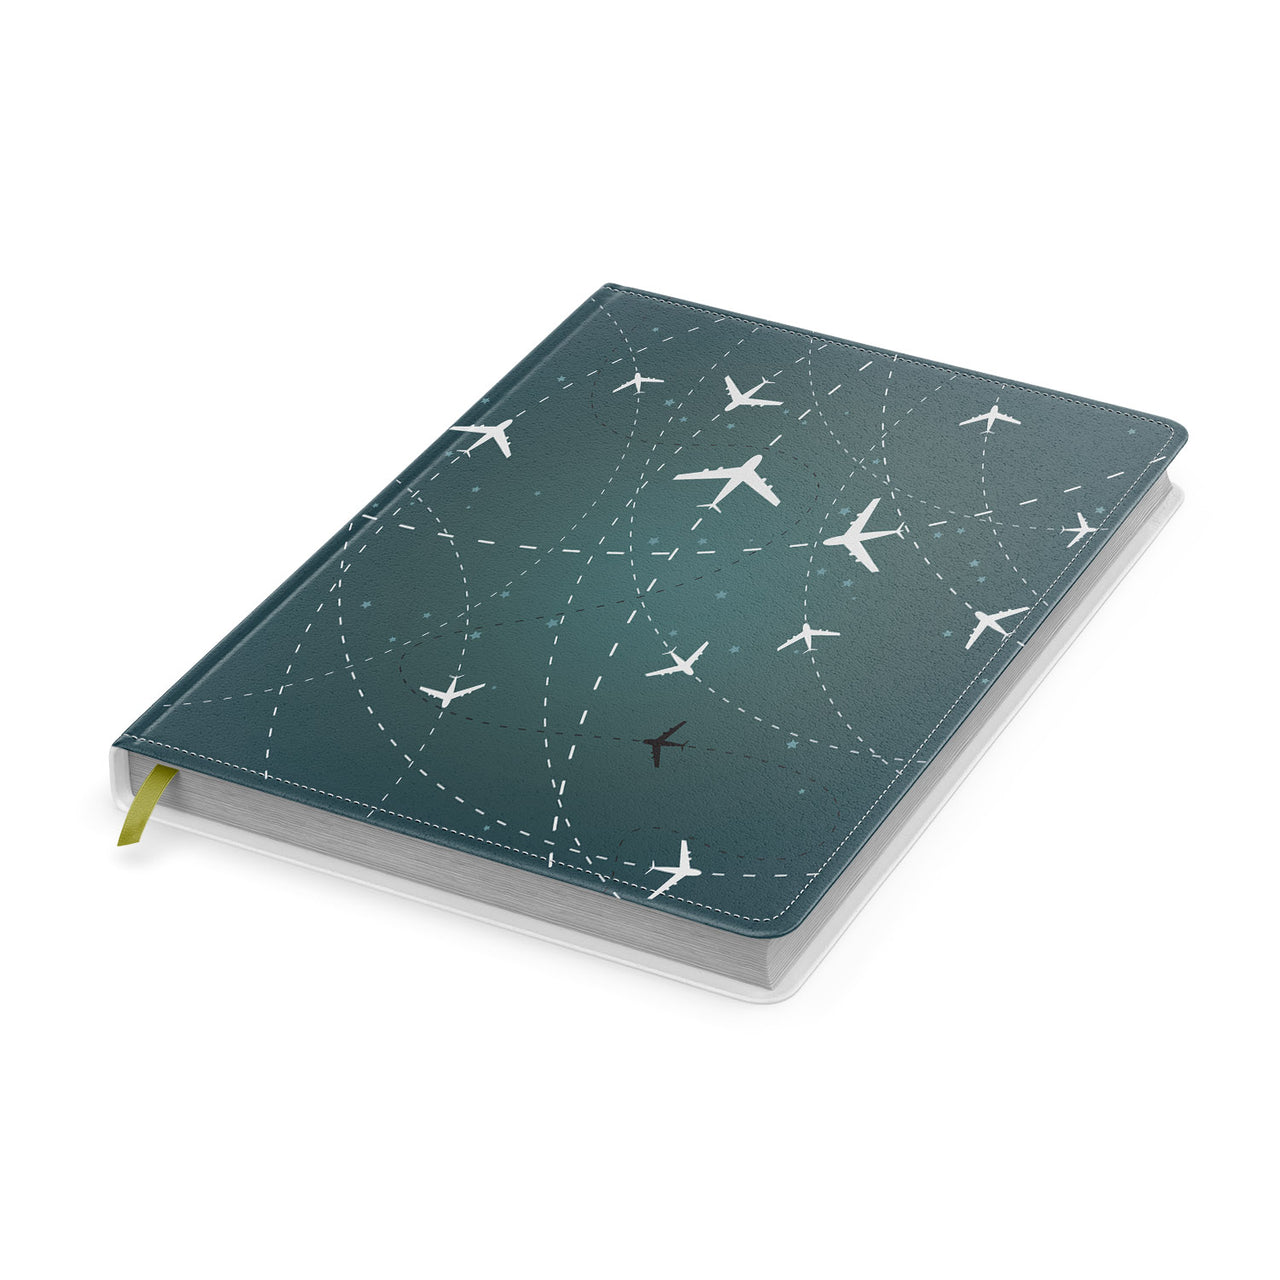 Travelling with Aircraft Designed Notebooks